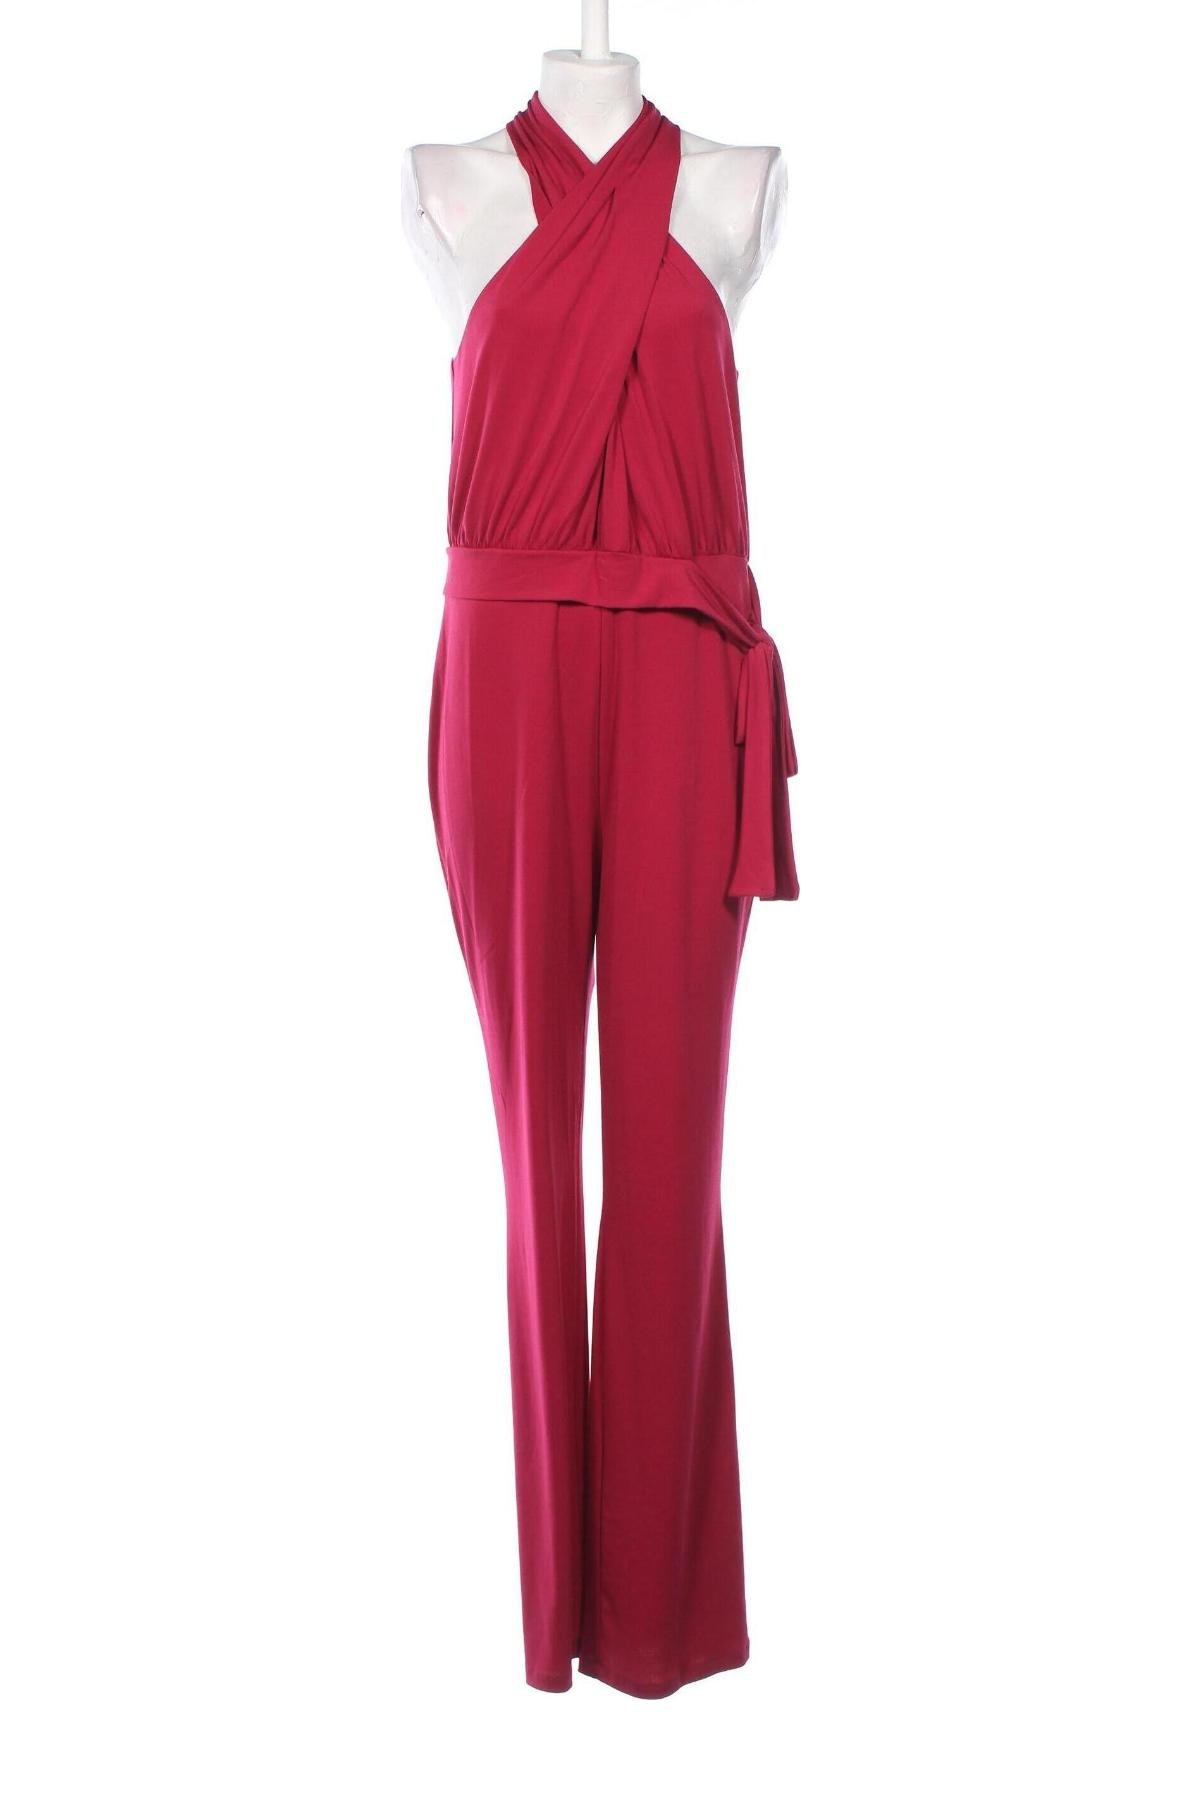 Damen Overall Marciano by Guess, Größe L, Farbe Rosa, Preis € 29,35